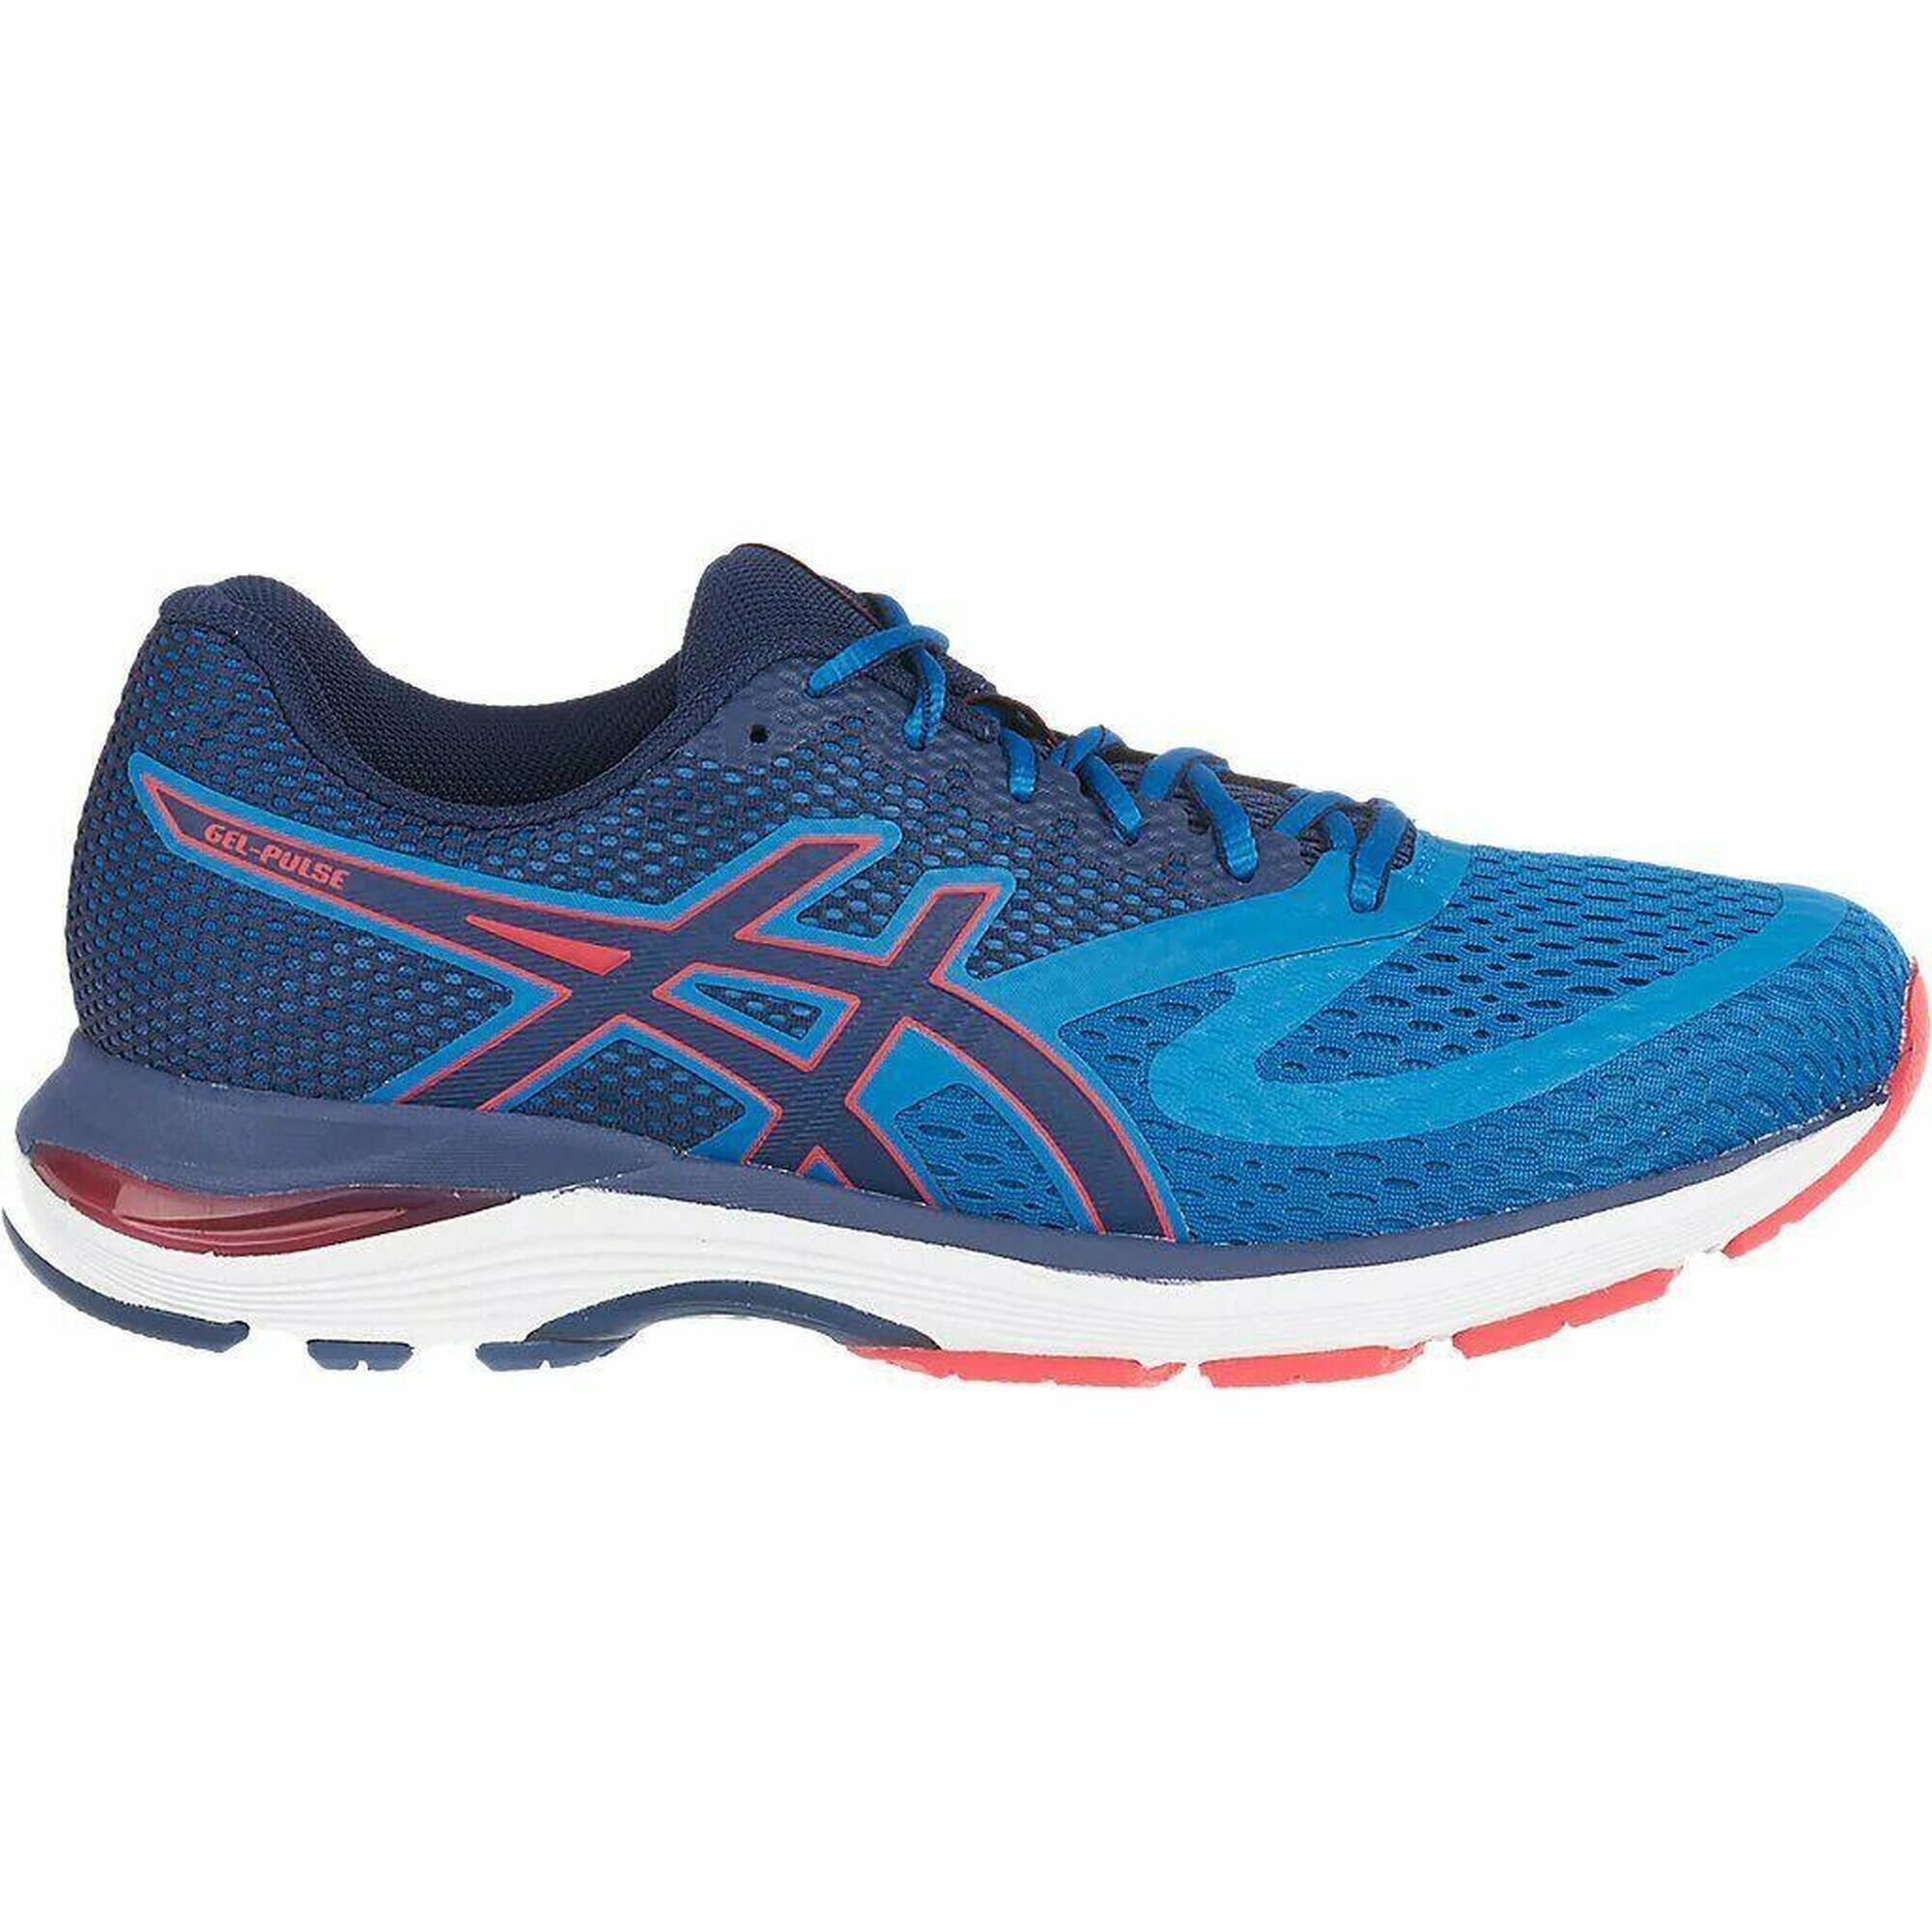 ASICS Asics Gel-Pulse 10 Mens Trainers Aw18 1011A007-400